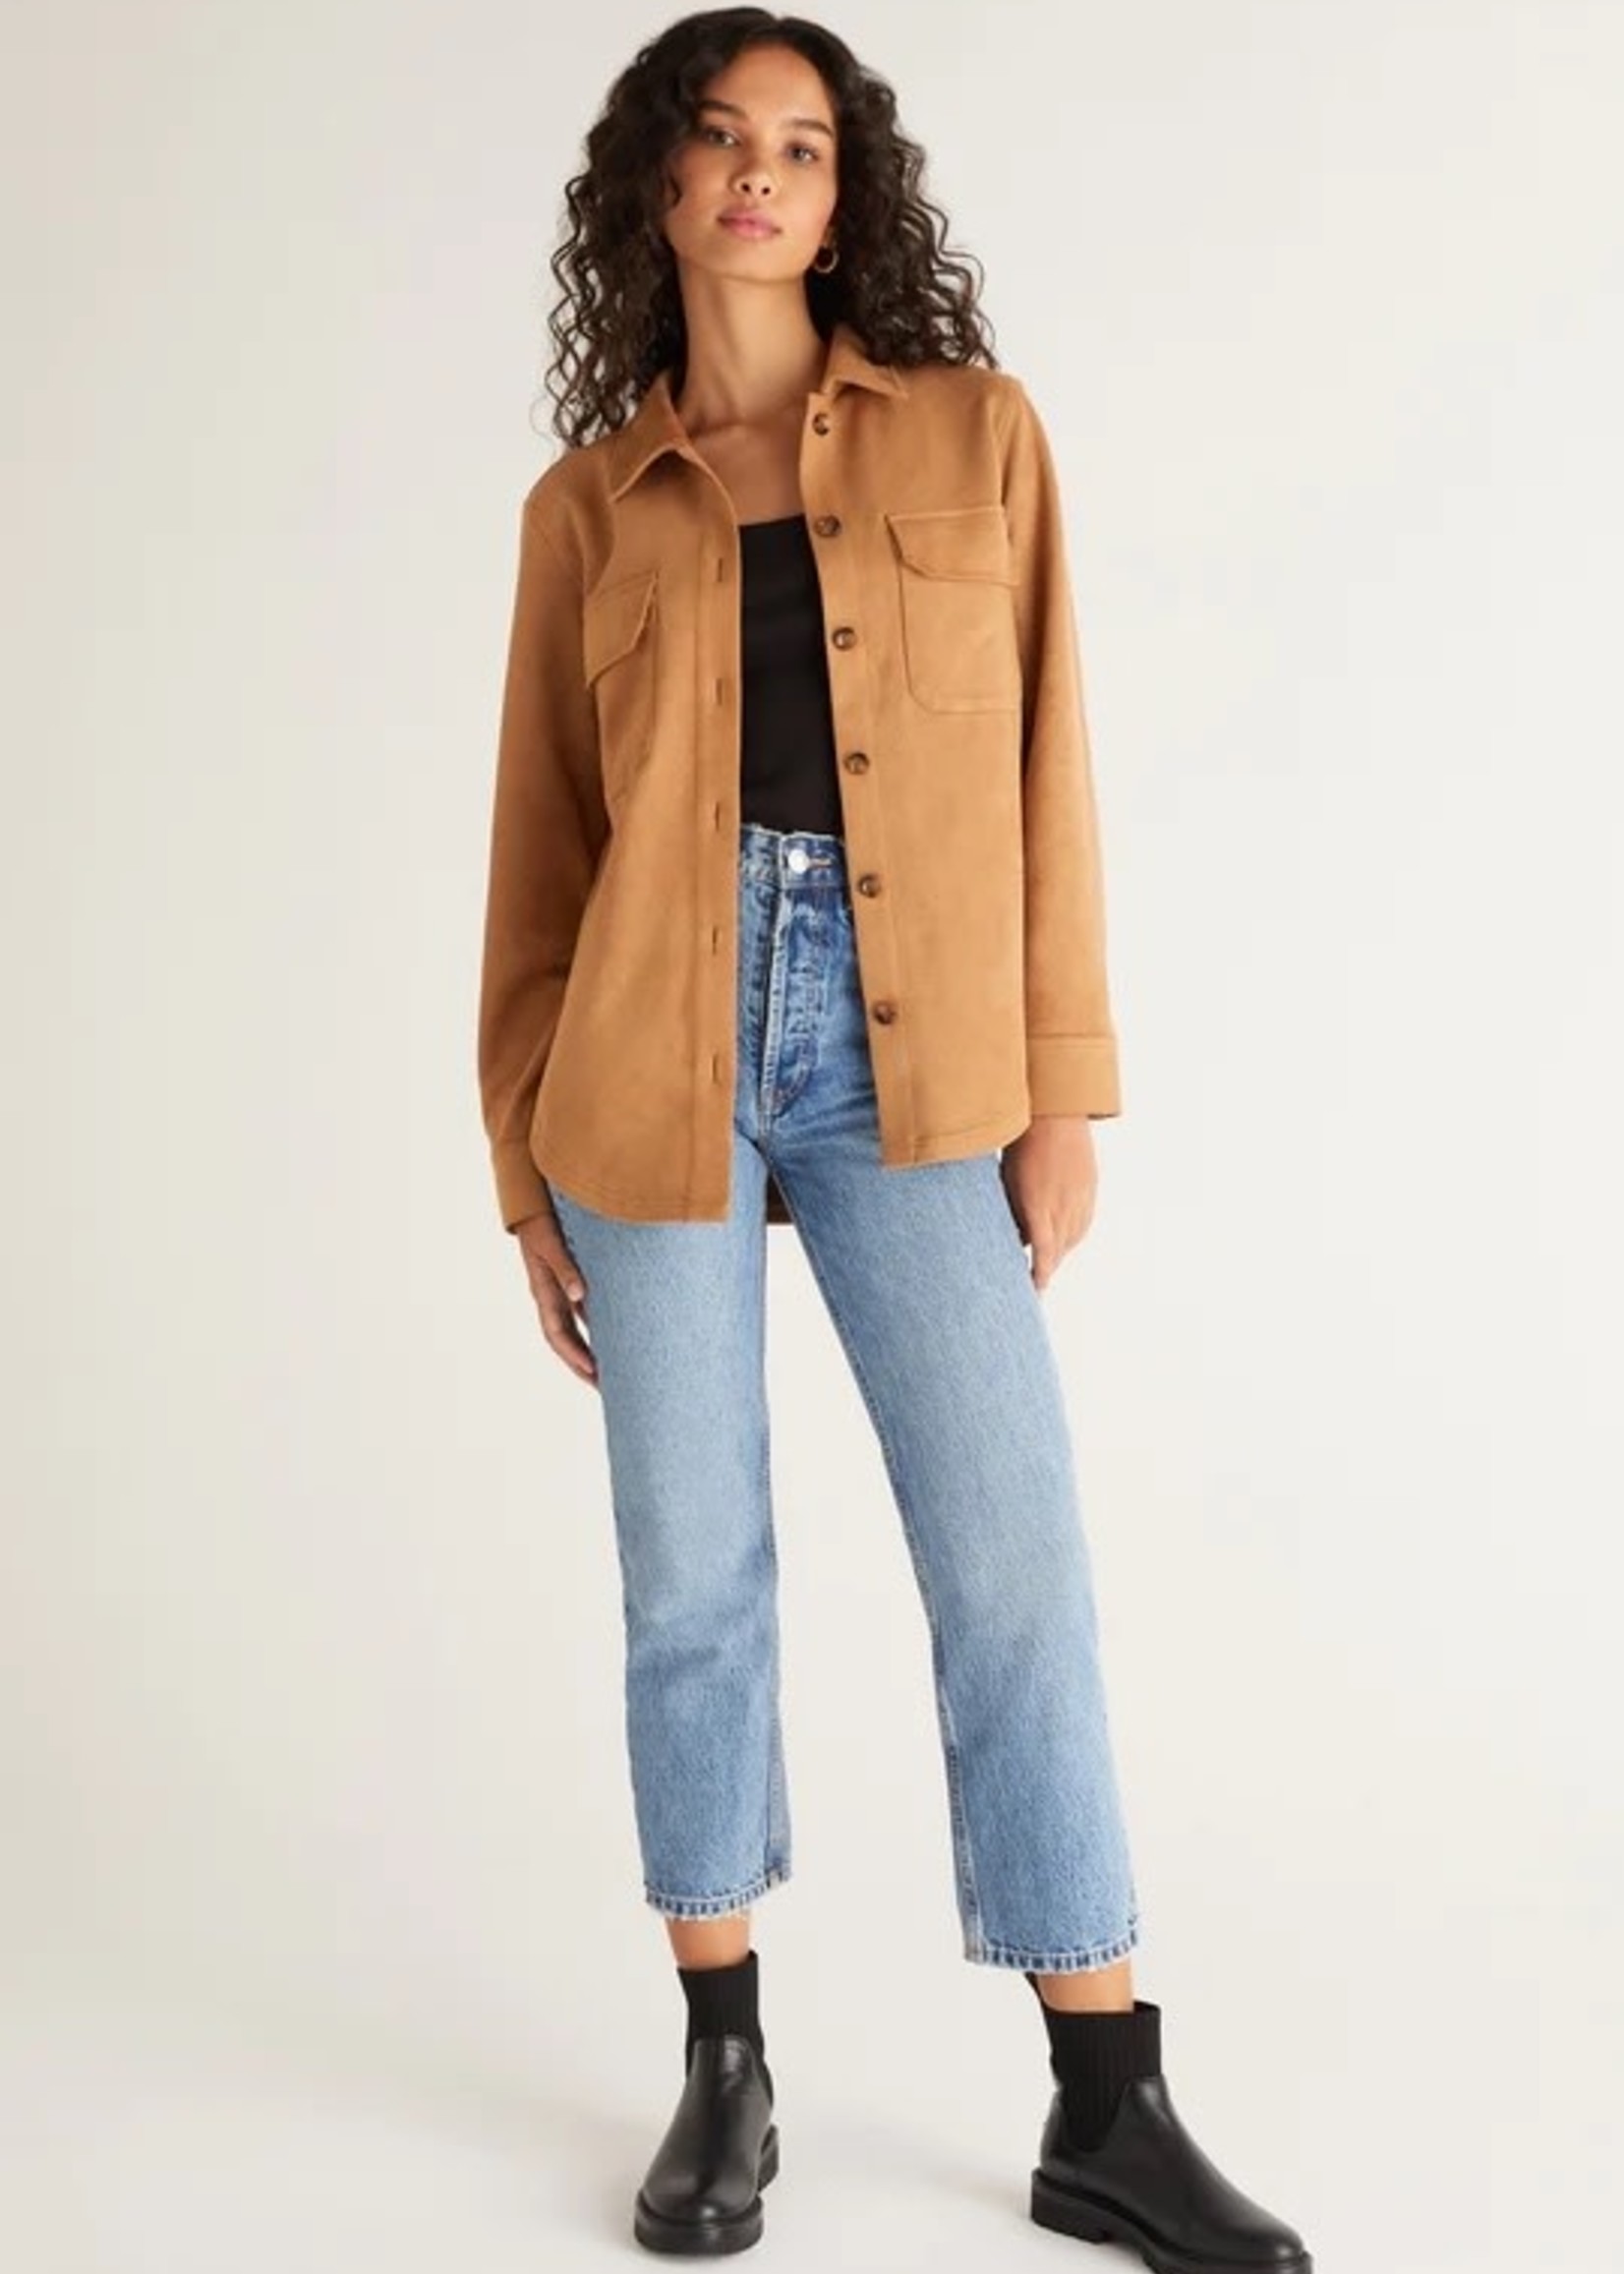 Z SUPPLY Evelyn Faux Suede Shacket